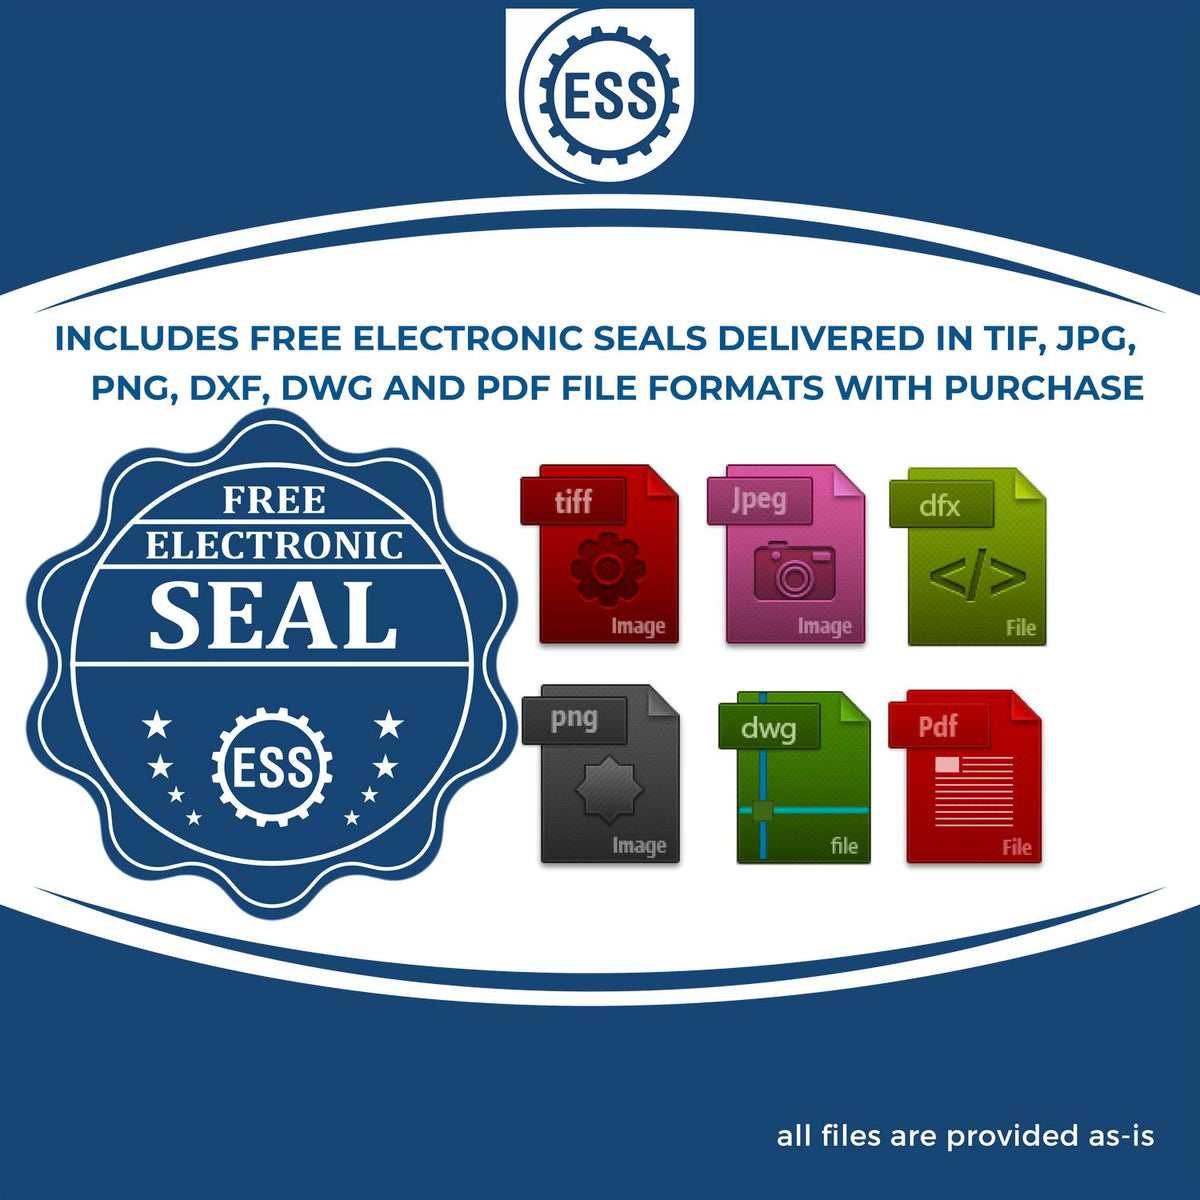 An infographic for the free electronic seal for the Wooden Handle Georgia Rectangular Notary Public Stamp illustrating the different file type icons such as DXF, DWG, TIF, JPG and PNG.